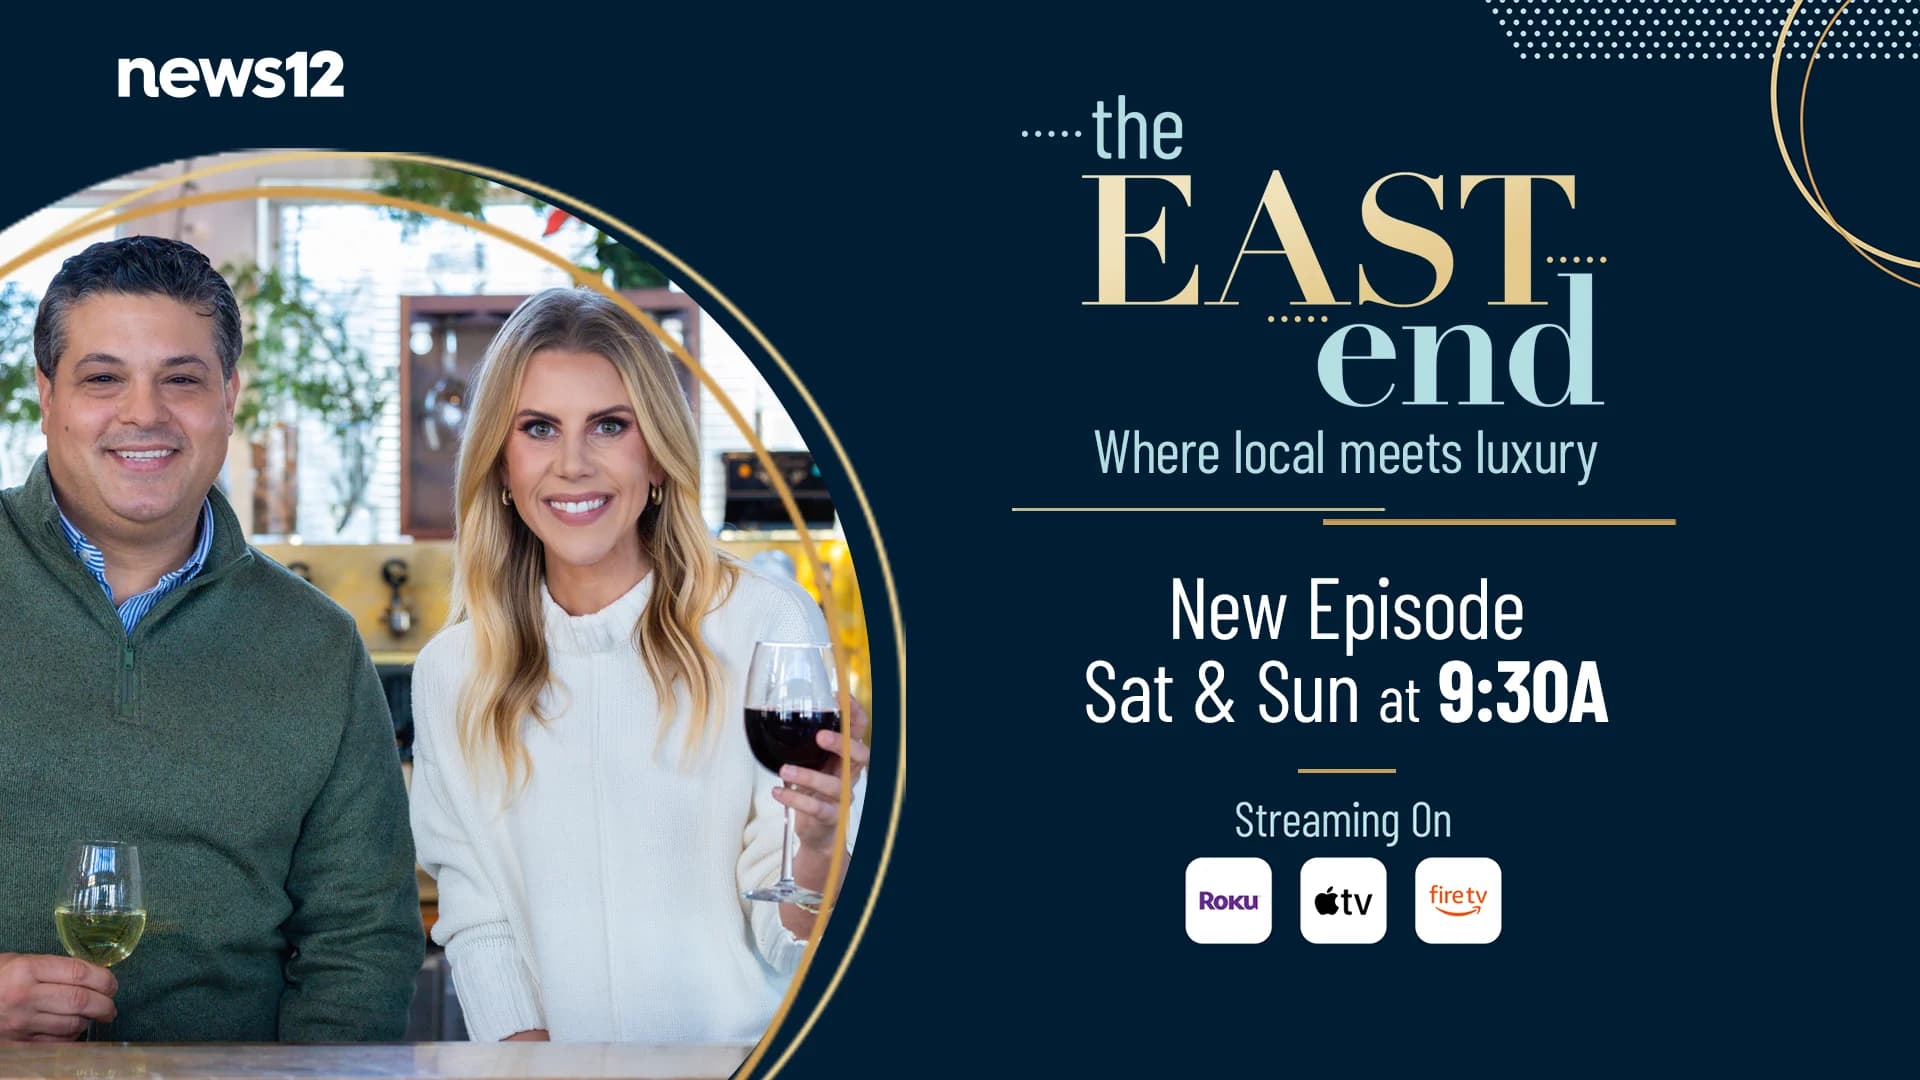 Get pampered in Montauk, check out a head-turning roadside attraction & enjoy a taste of Greece on a new episode of  'The East End' this weekend